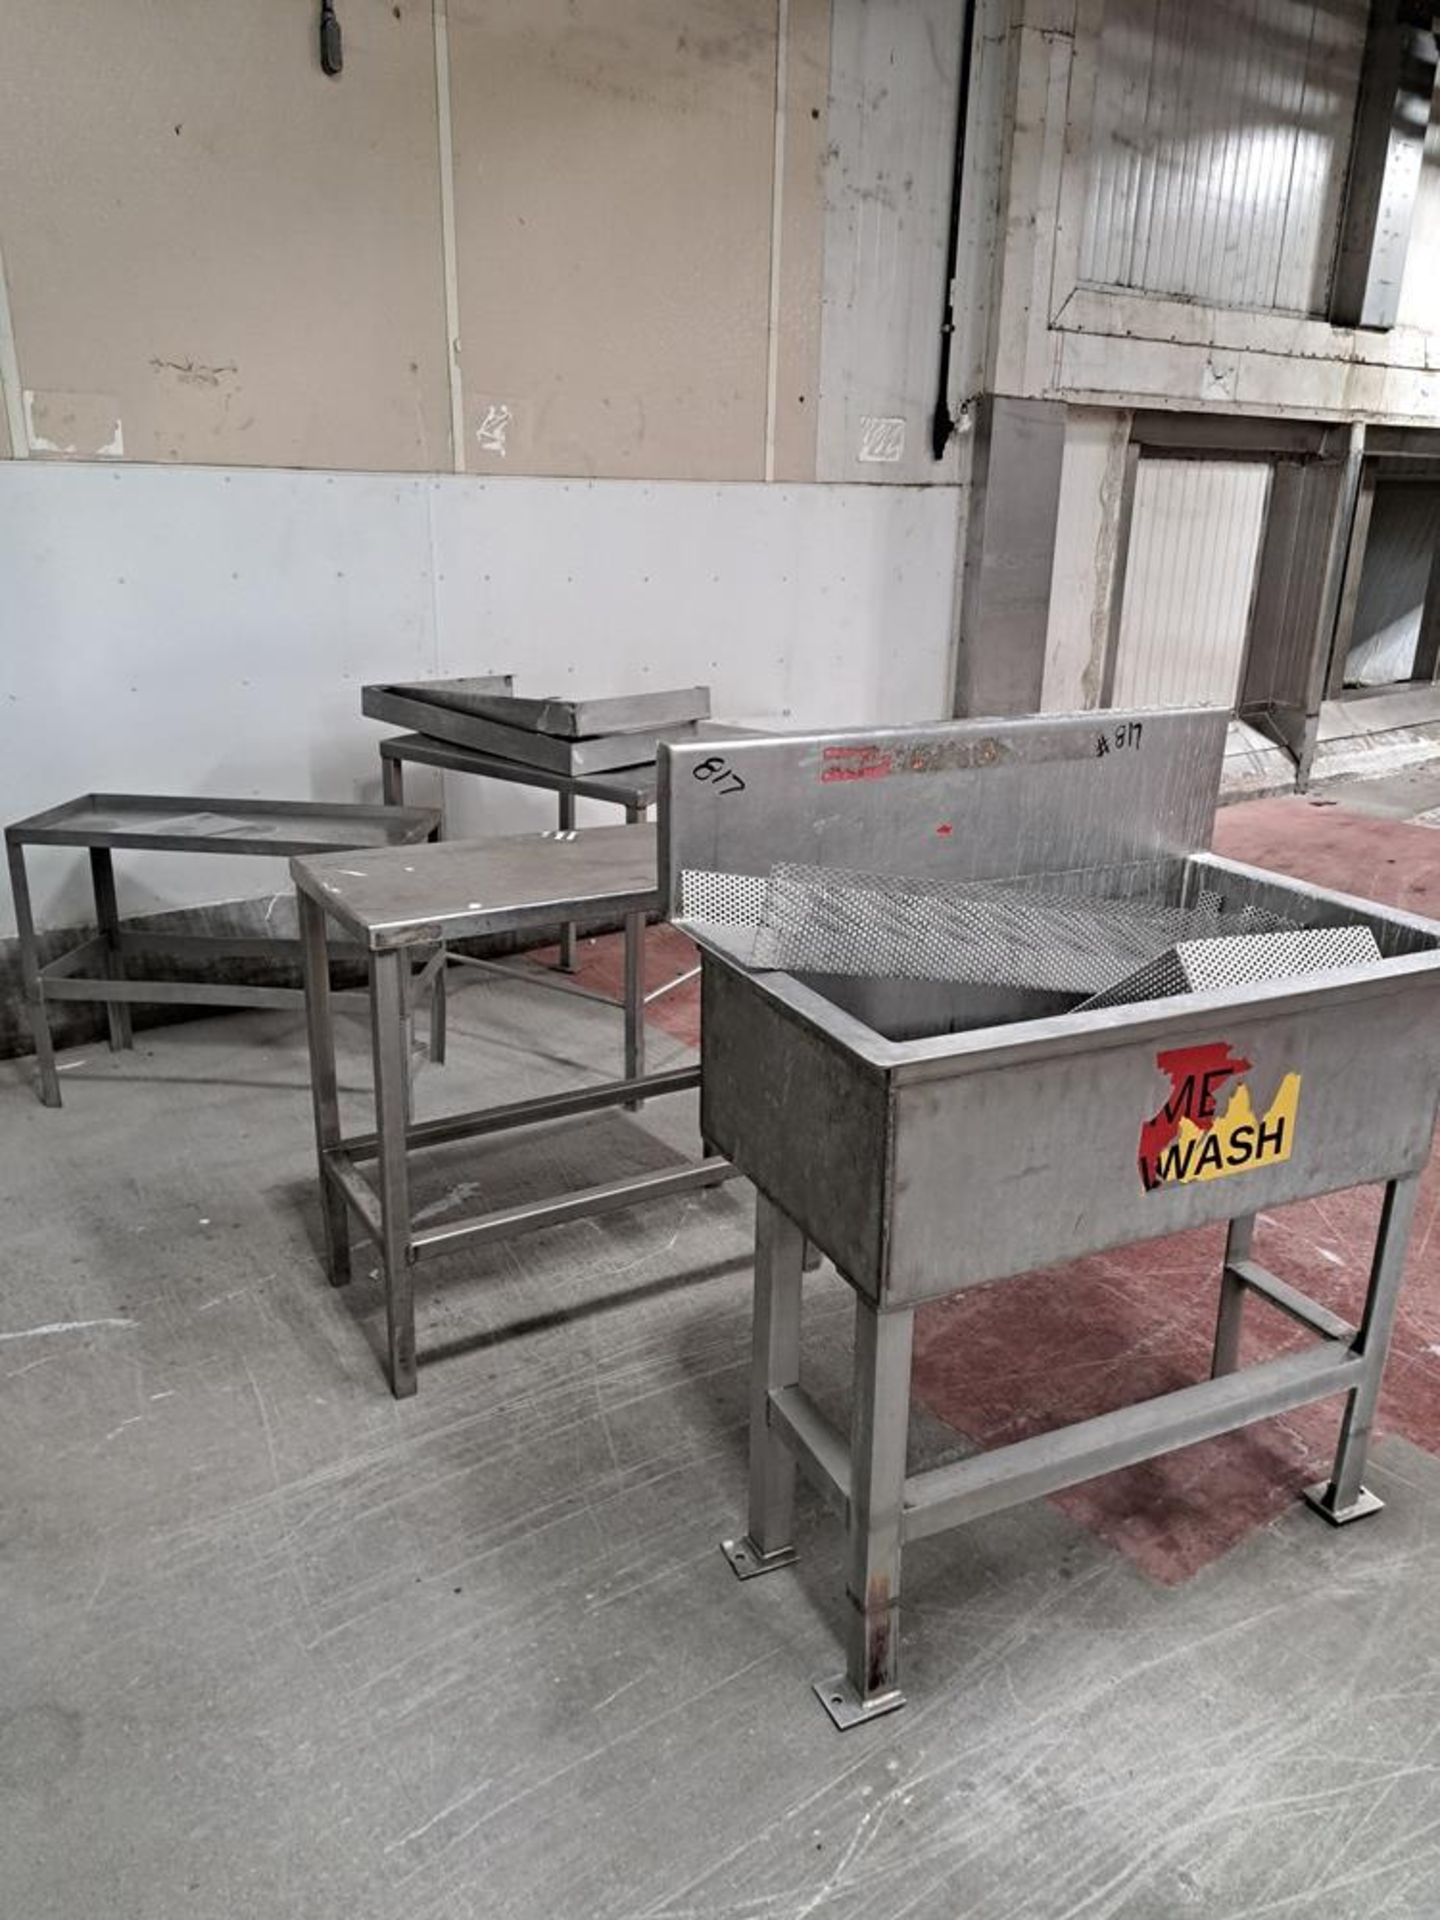 Lot Stainless Steel Meat Wash, (3) Stainless Steel Tables: Required Loading Fee $200.00, Rigger-Norm